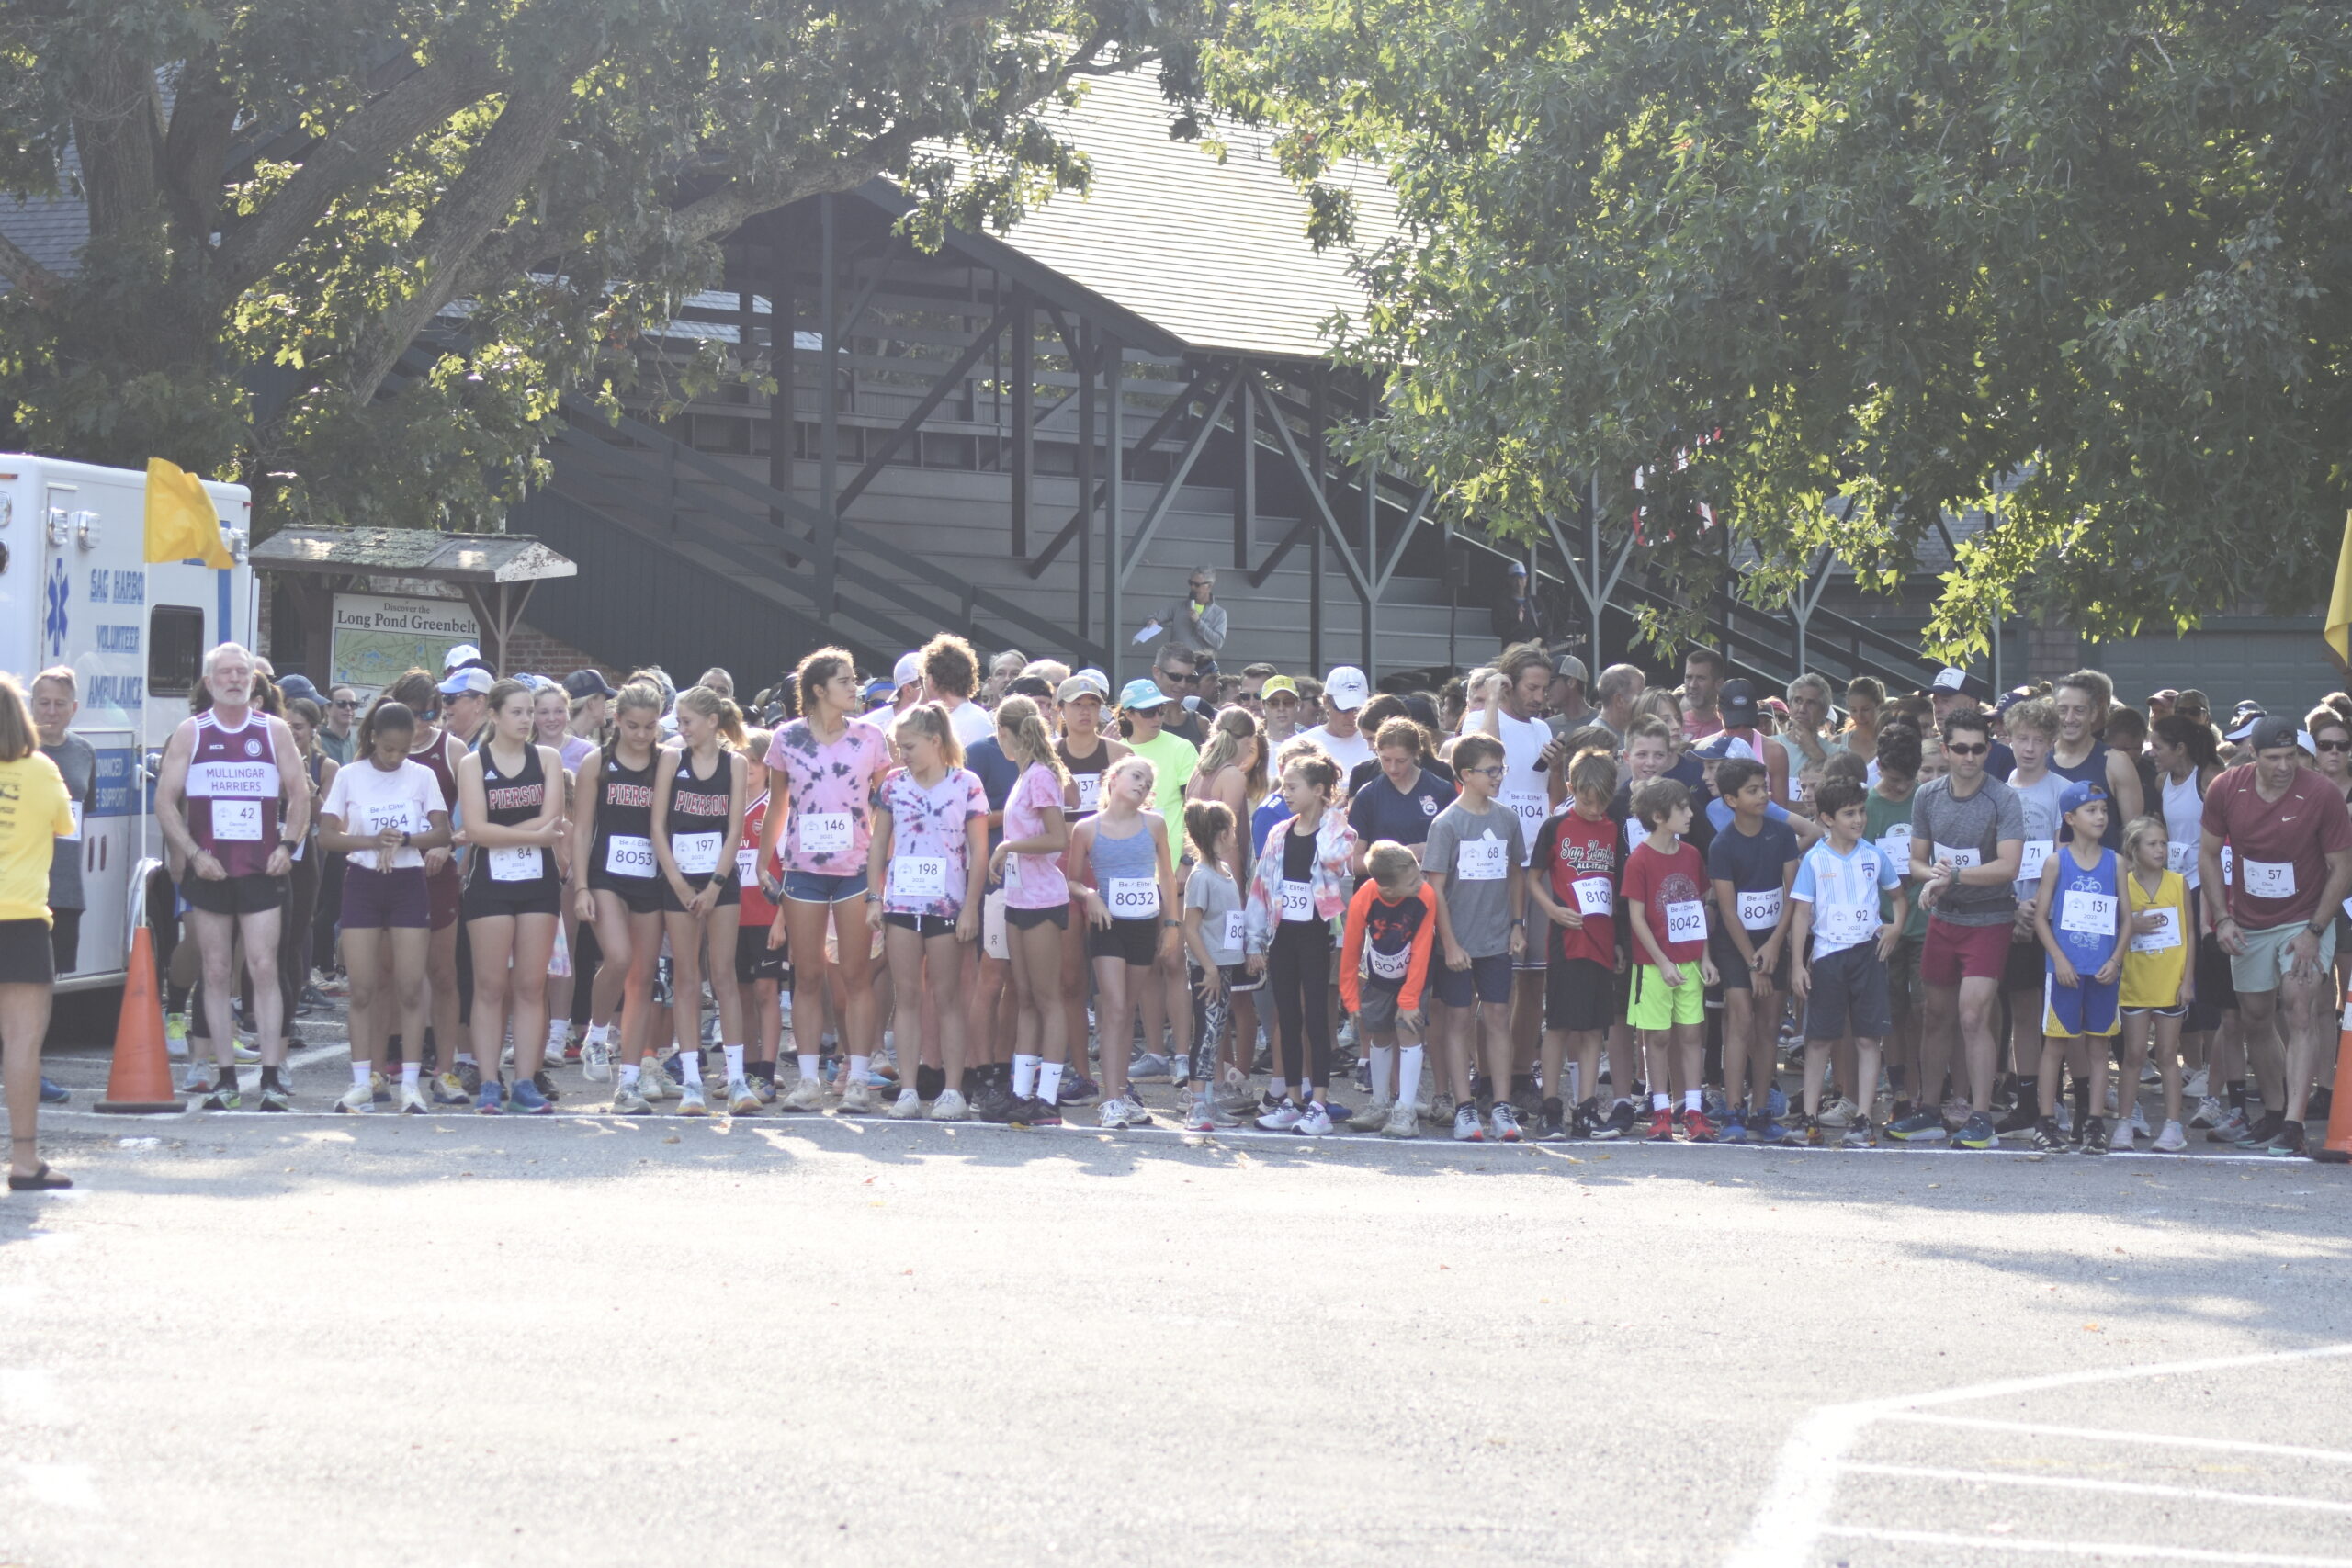 Runners and walkers line up for the start of the second annual Mashashimuet Park Friends and Family 5K on Sunday morning.    DREW BUDD